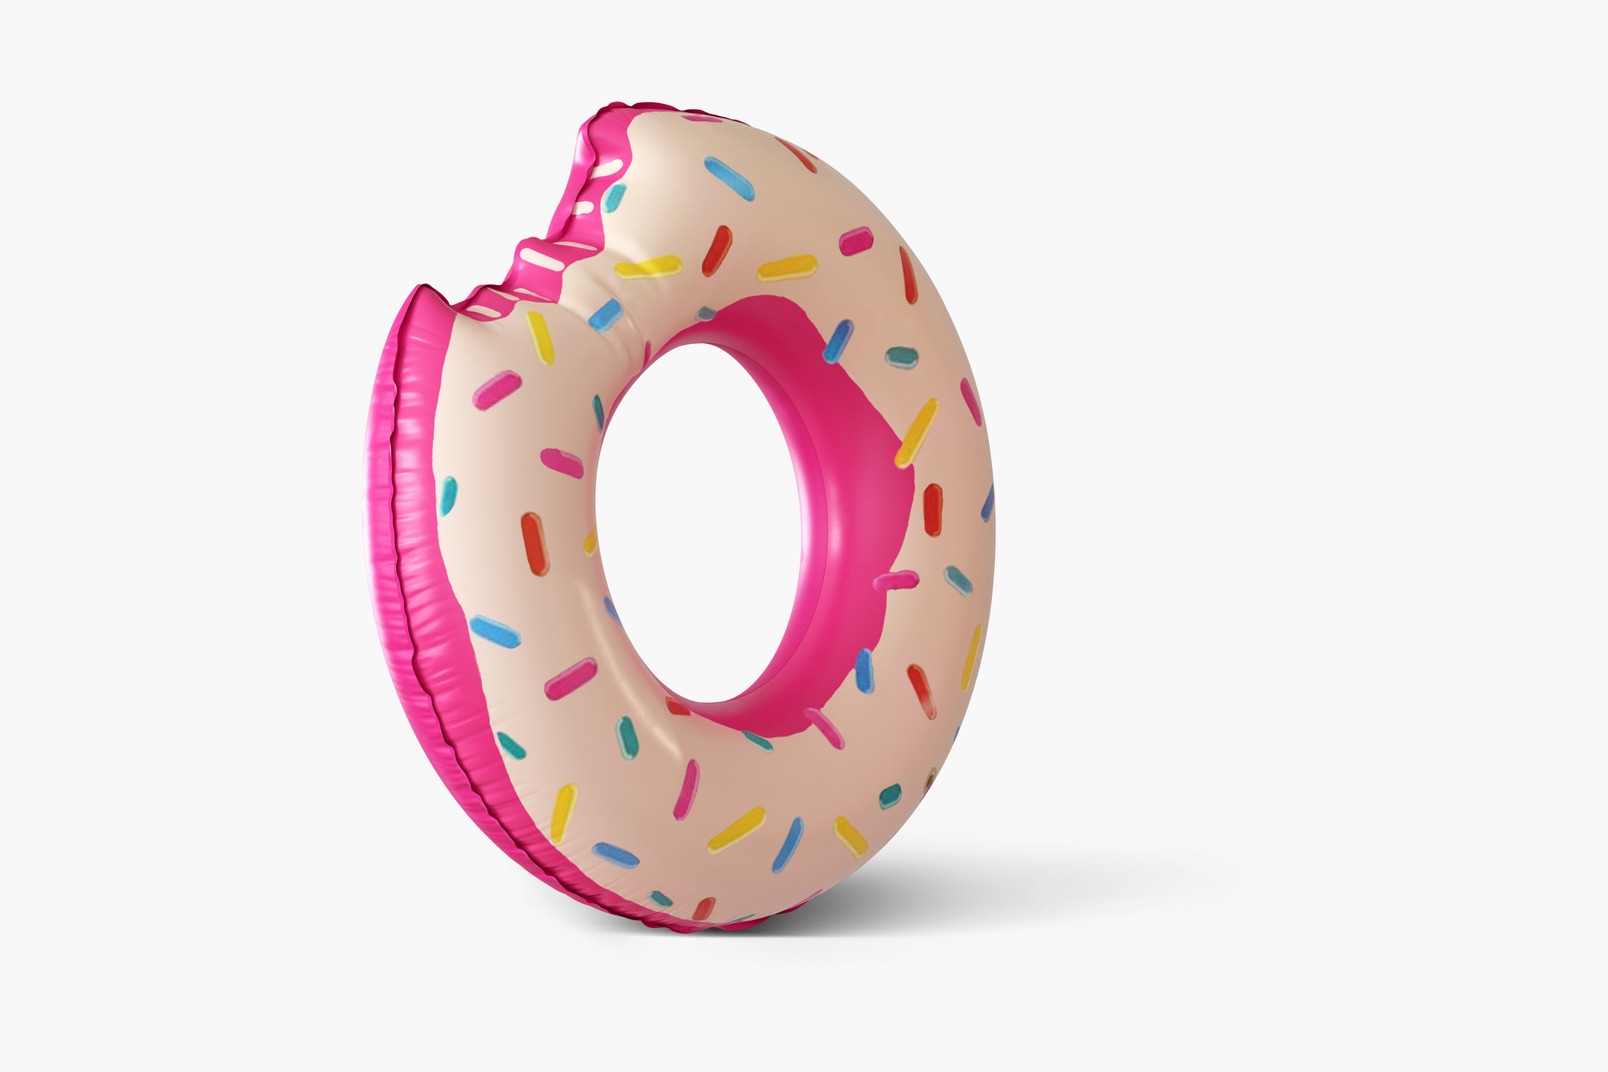 Pink and white donut rubber ring on white background